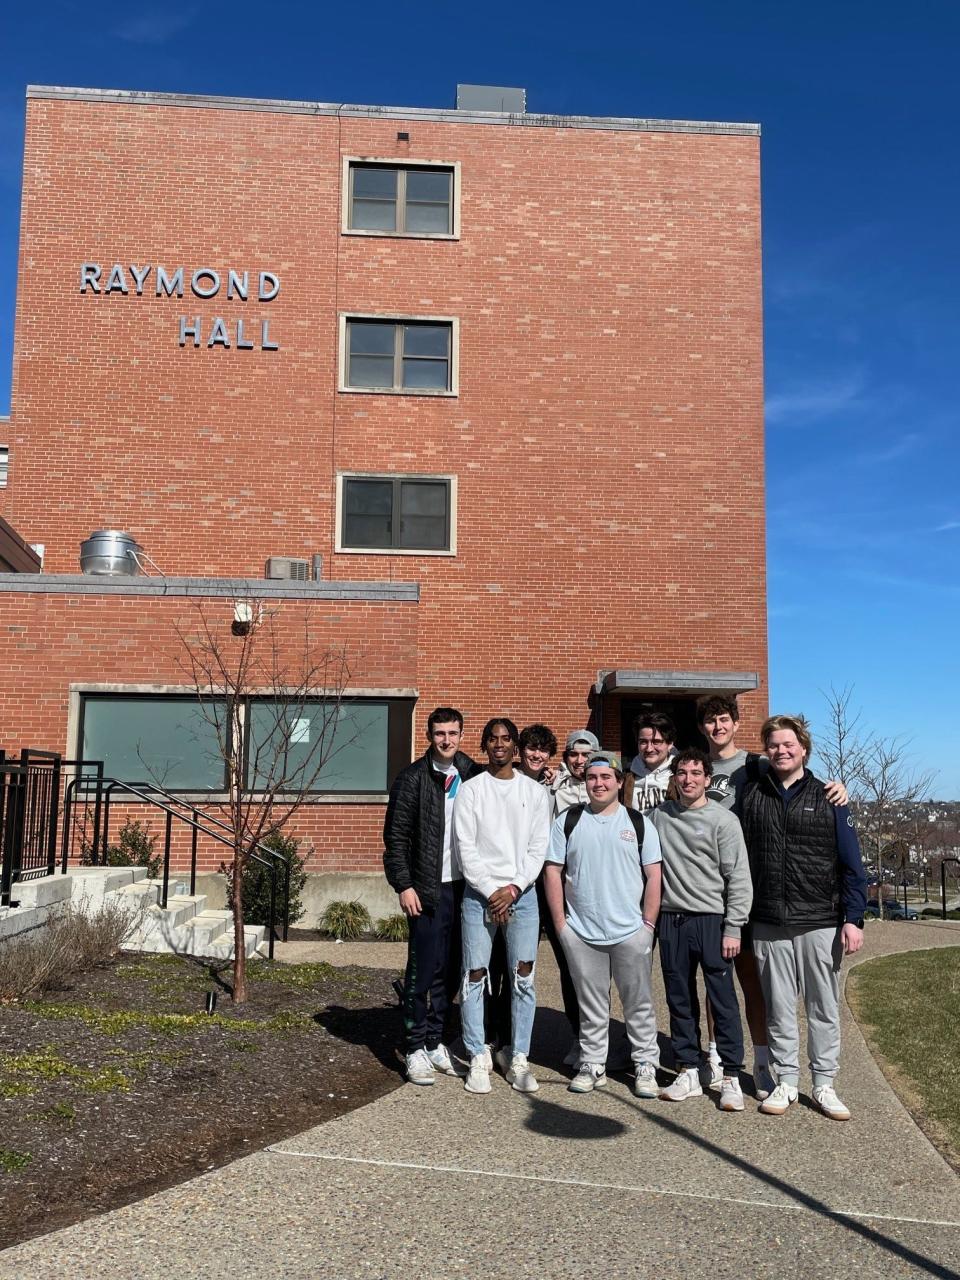 Providence College students, including Daniel Singh, front left, and Brandon Reichert, front right, who helped raise funds to send security guard James Mogaji to see family in Liberia stand in front of Raymond Hall, where they live and Mogaji works.